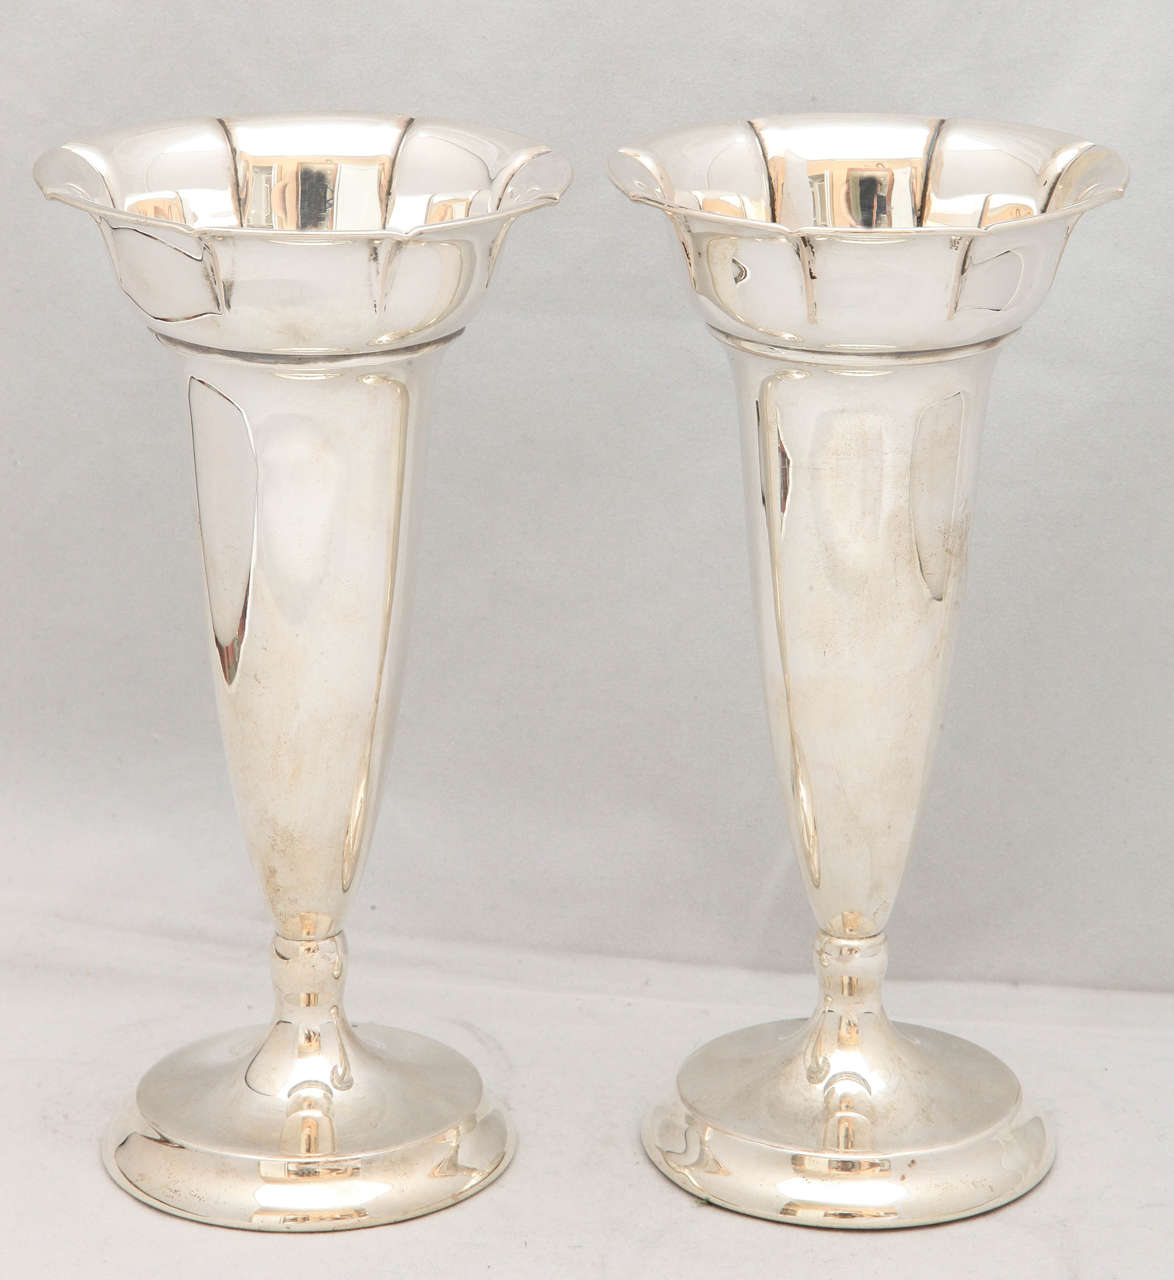 Pair of continental (.830) silver vases, Norway, circa 1930s, Thorvald Martinsen - maker. Measures: Each is 8